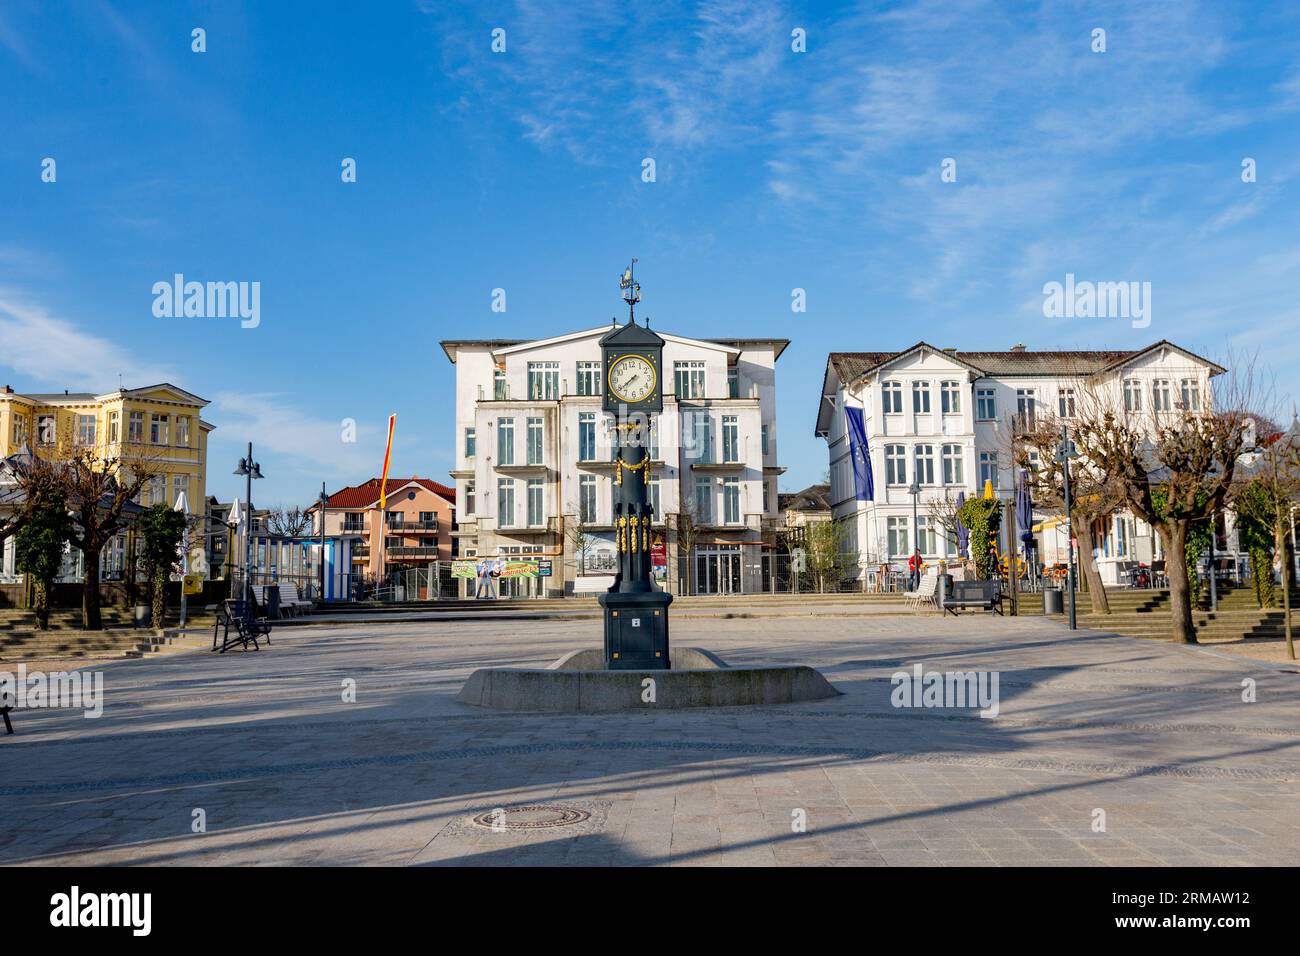 Ahlbeck, Germany - April 17, 2014: old clock tower at the scenic promenade with historic in wilhelminian style hotels in Ahlbeck, Germany. Stock Photo